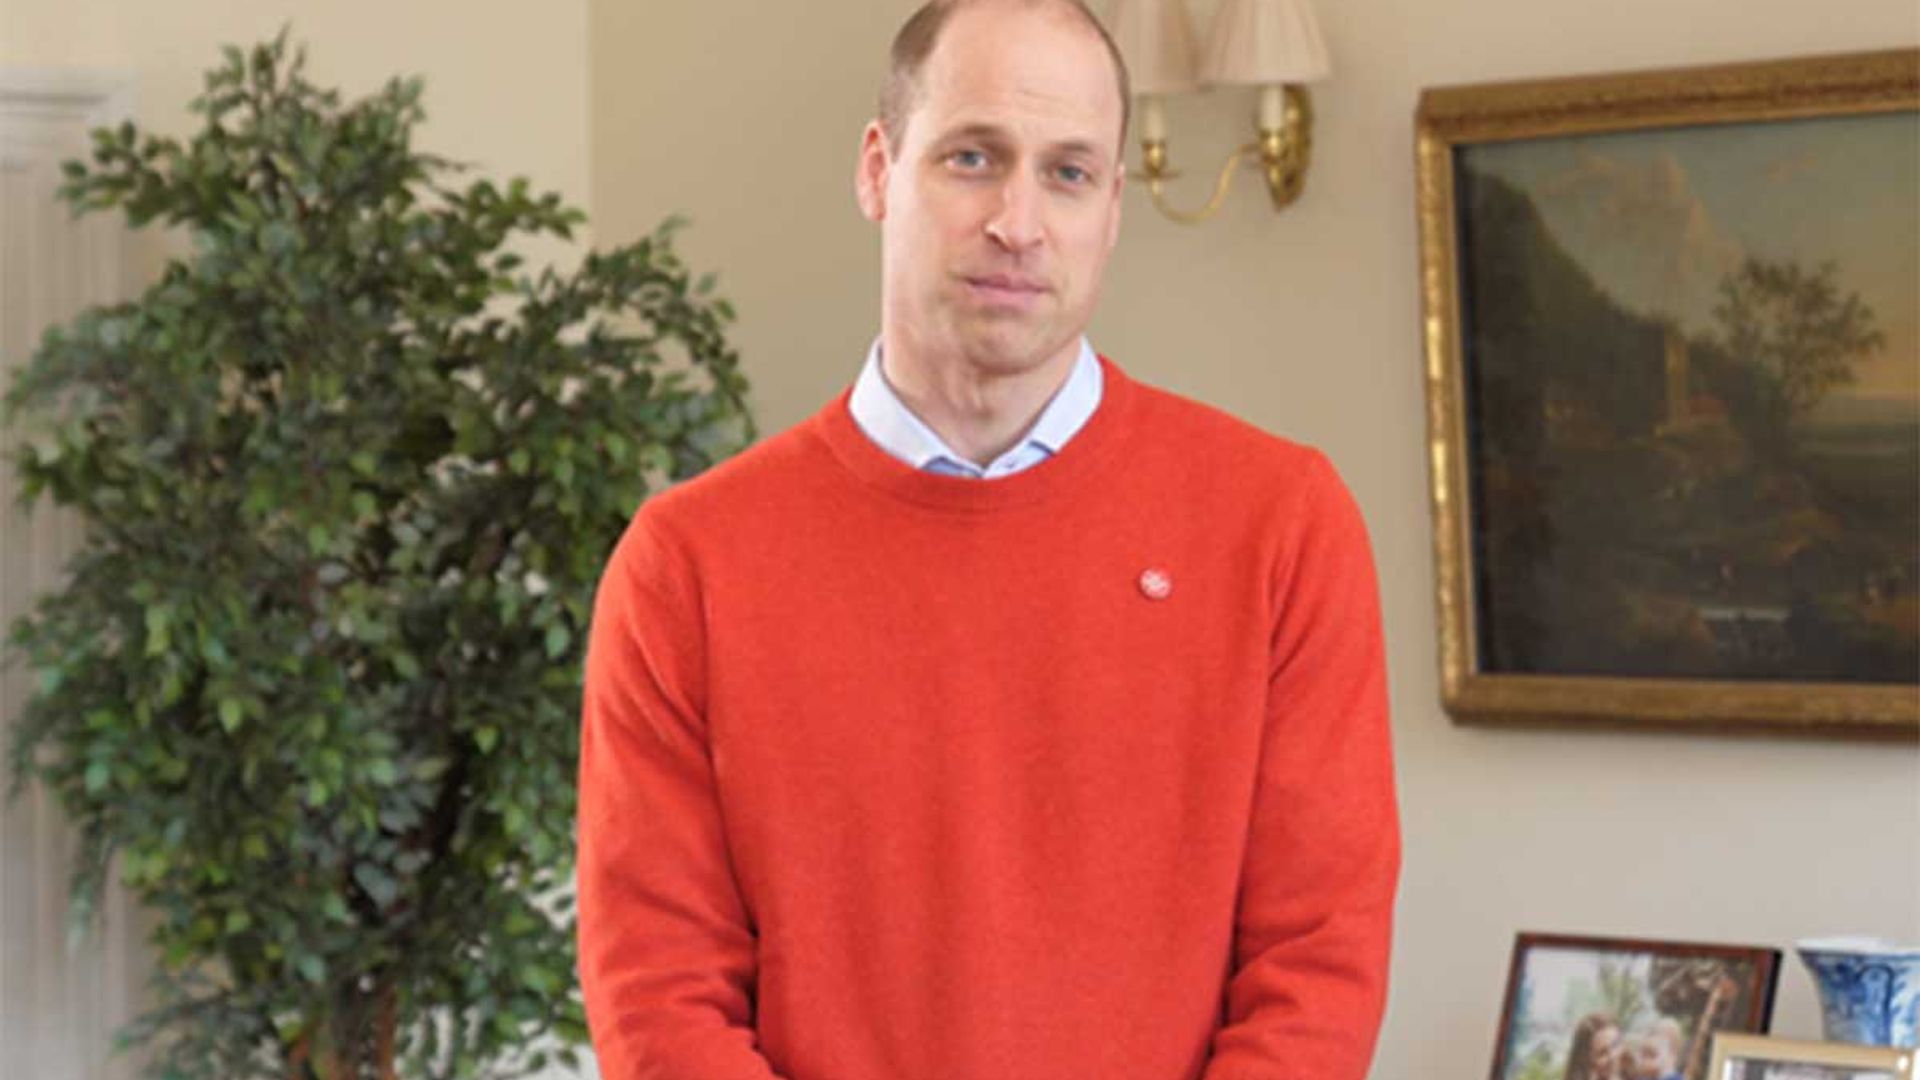 Prince William reminded of Stephen Fry comedy sketch during surprise Comic Relief appearance